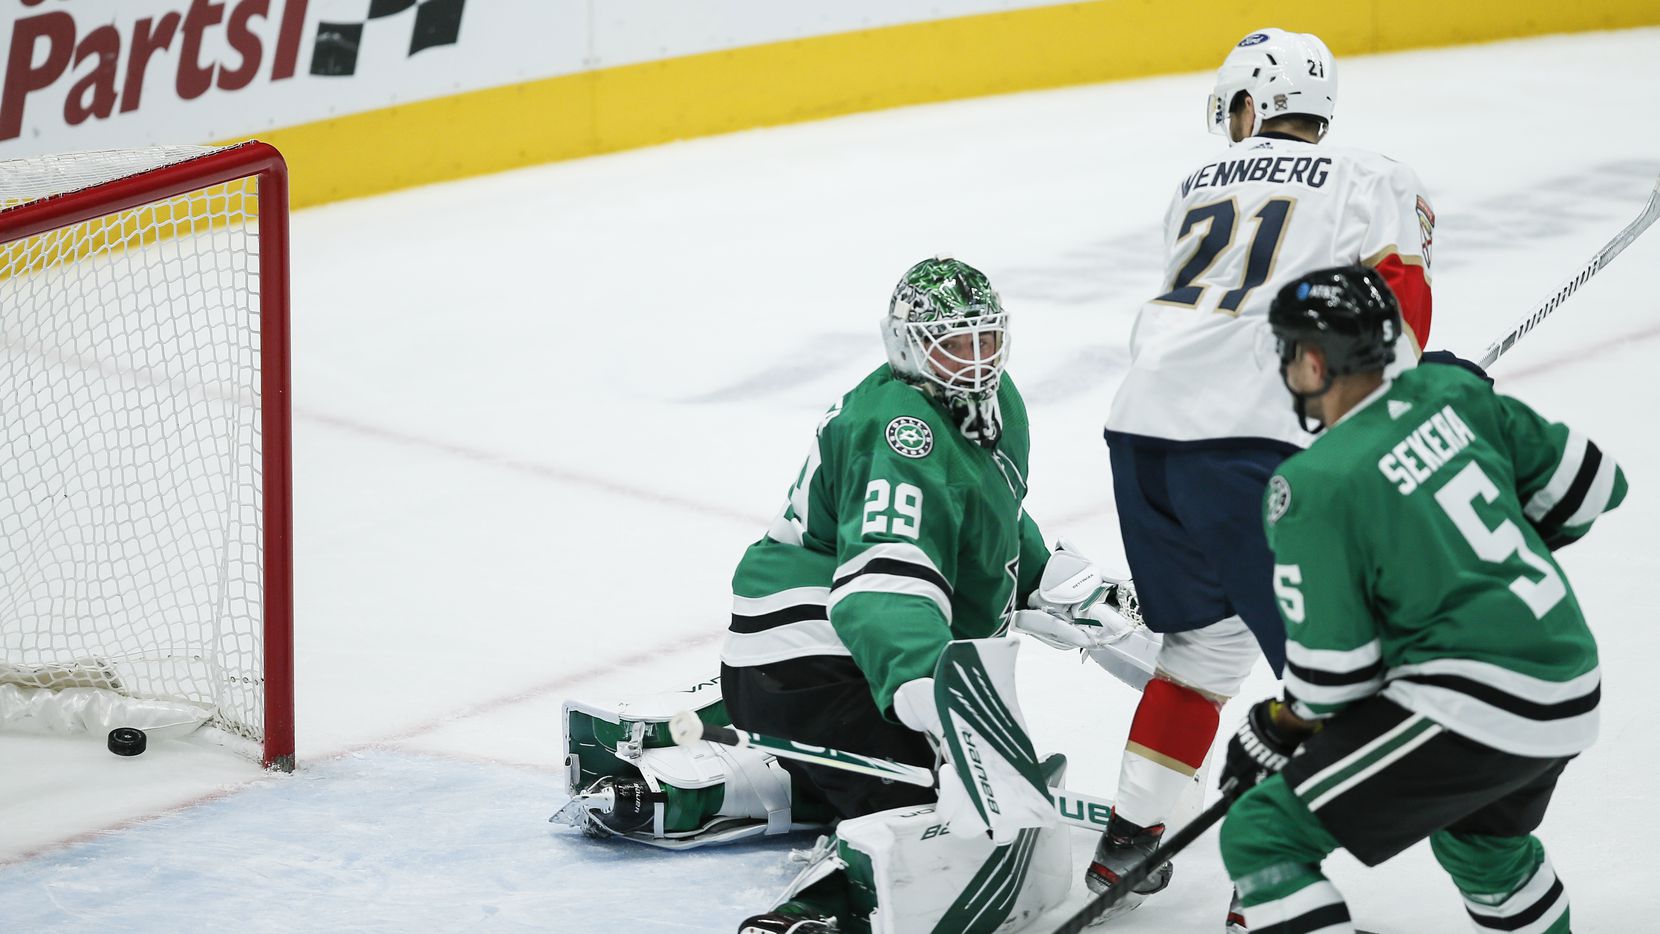 Florida Panthers forward Alex Wennberg (21) screens Dallas Stars goaltender Jake Oettinger (29) allowing Florida Panthers forward Jonathan Huberdeau to score during the first period of an NHL hockey game in Dallas, Sunday, March 28, 2021.